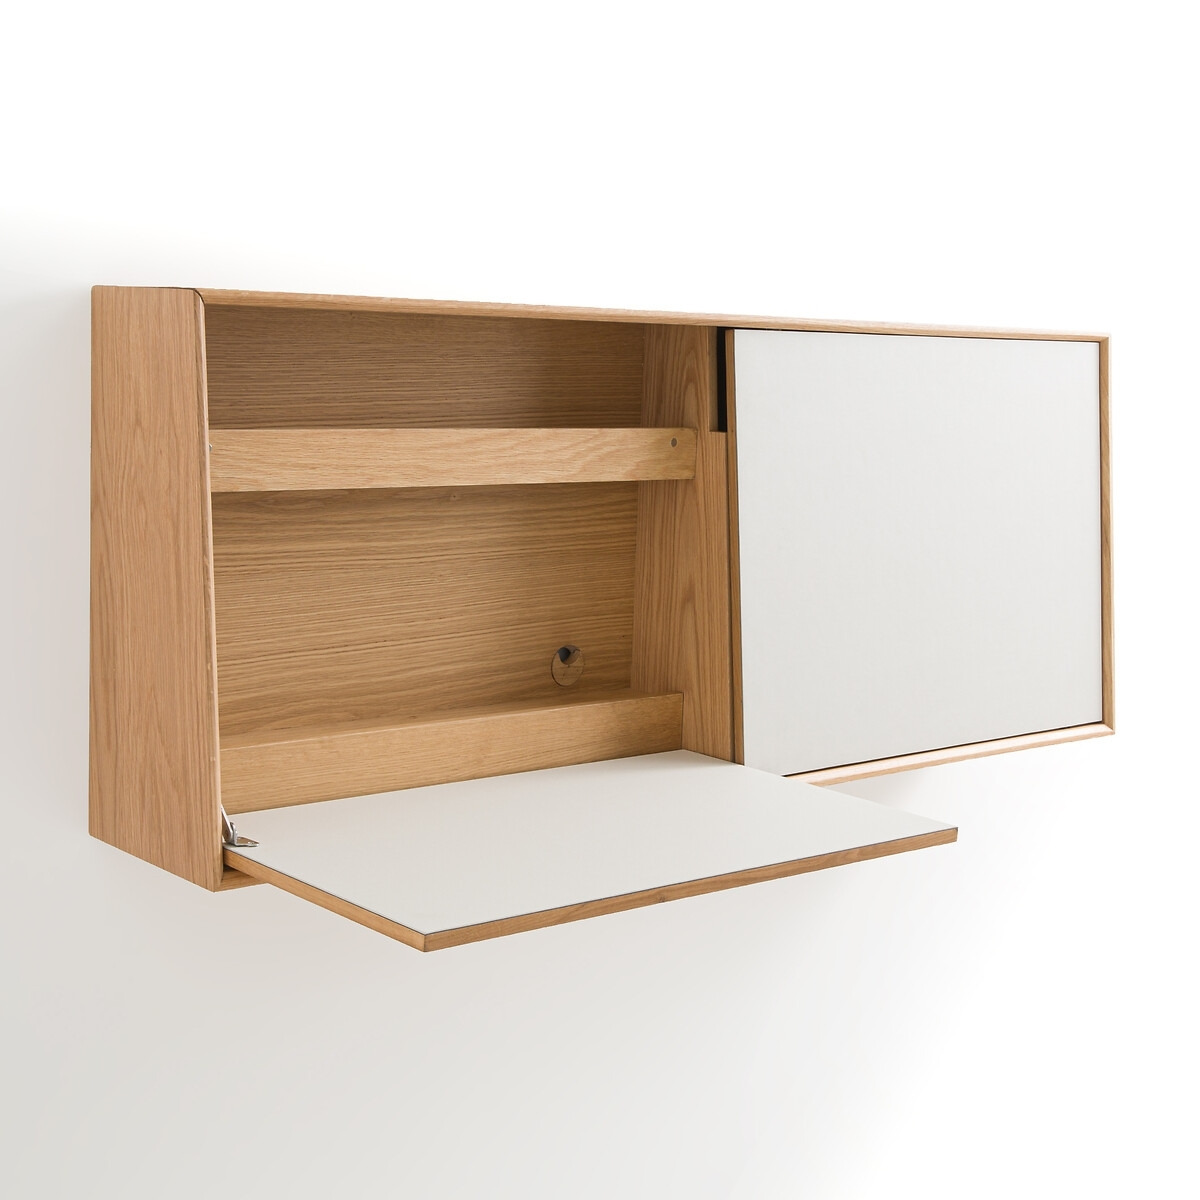 Equivoque Home Office Unit, by E. Gallina - image 1